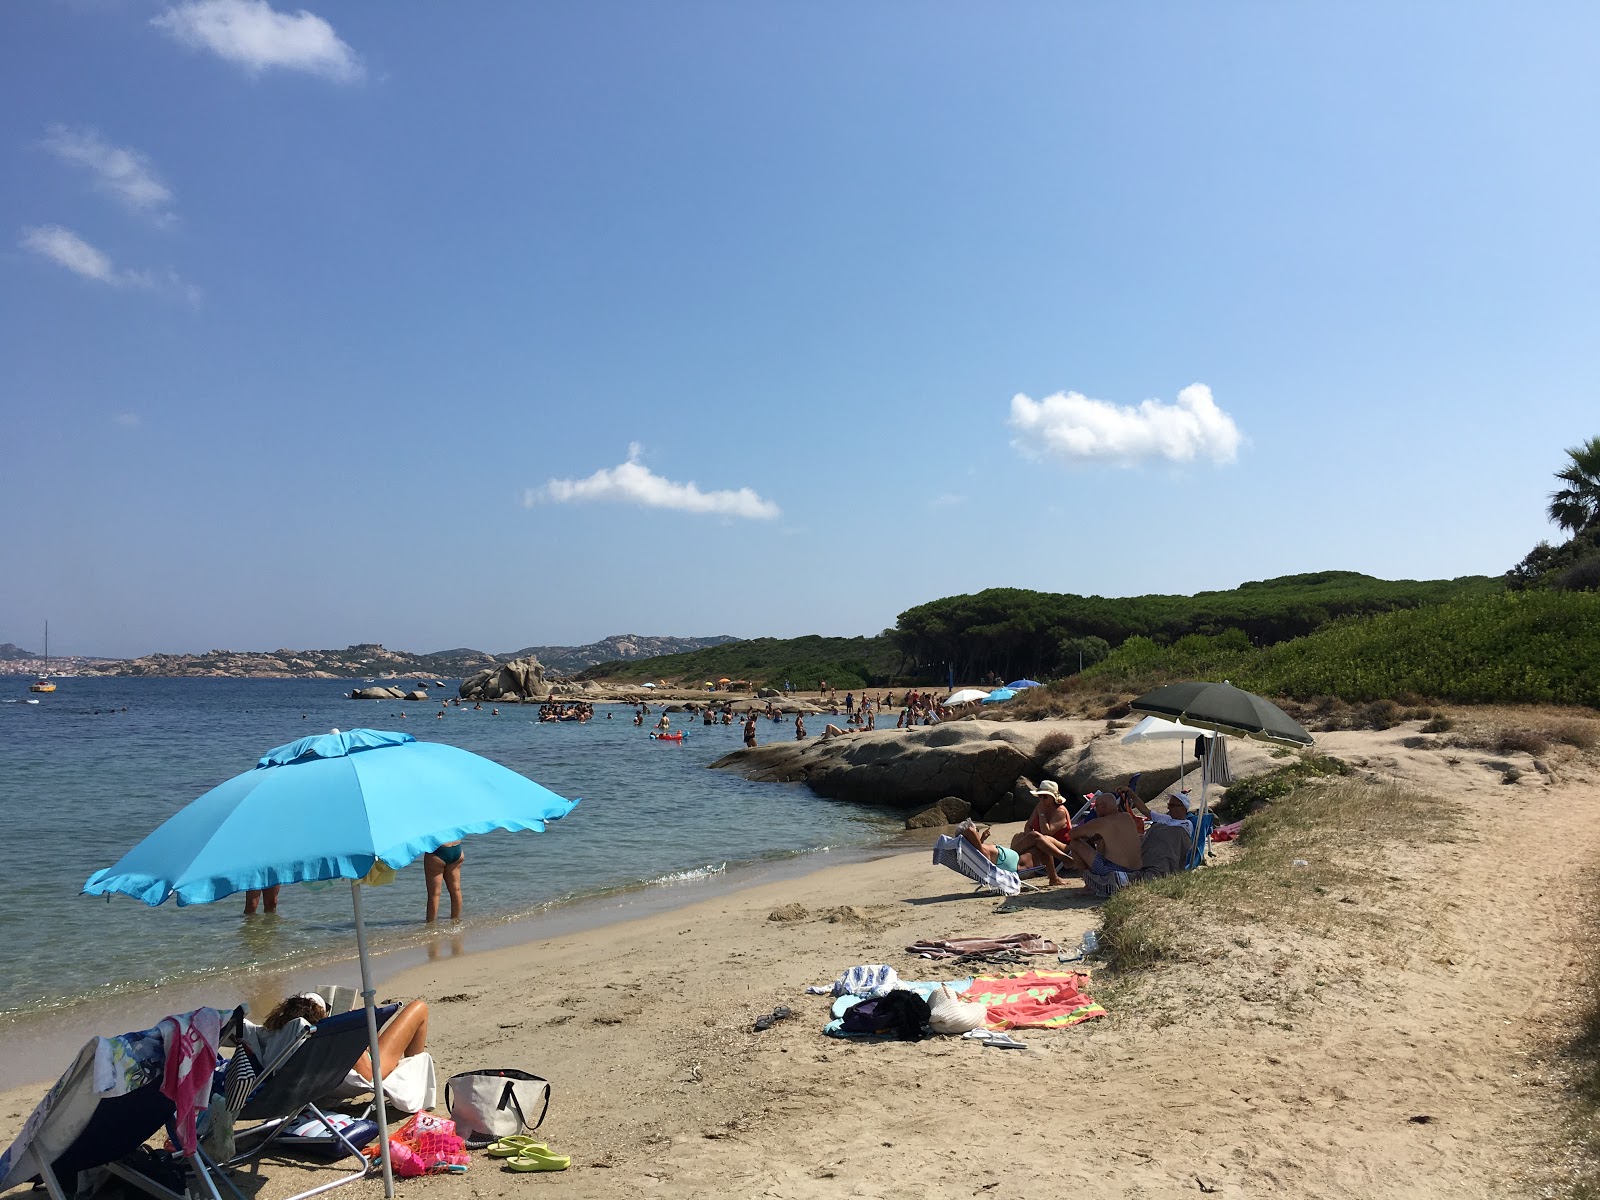 Photo of Spiaggia dell'Isolotto - popular place among relax connoisseurs